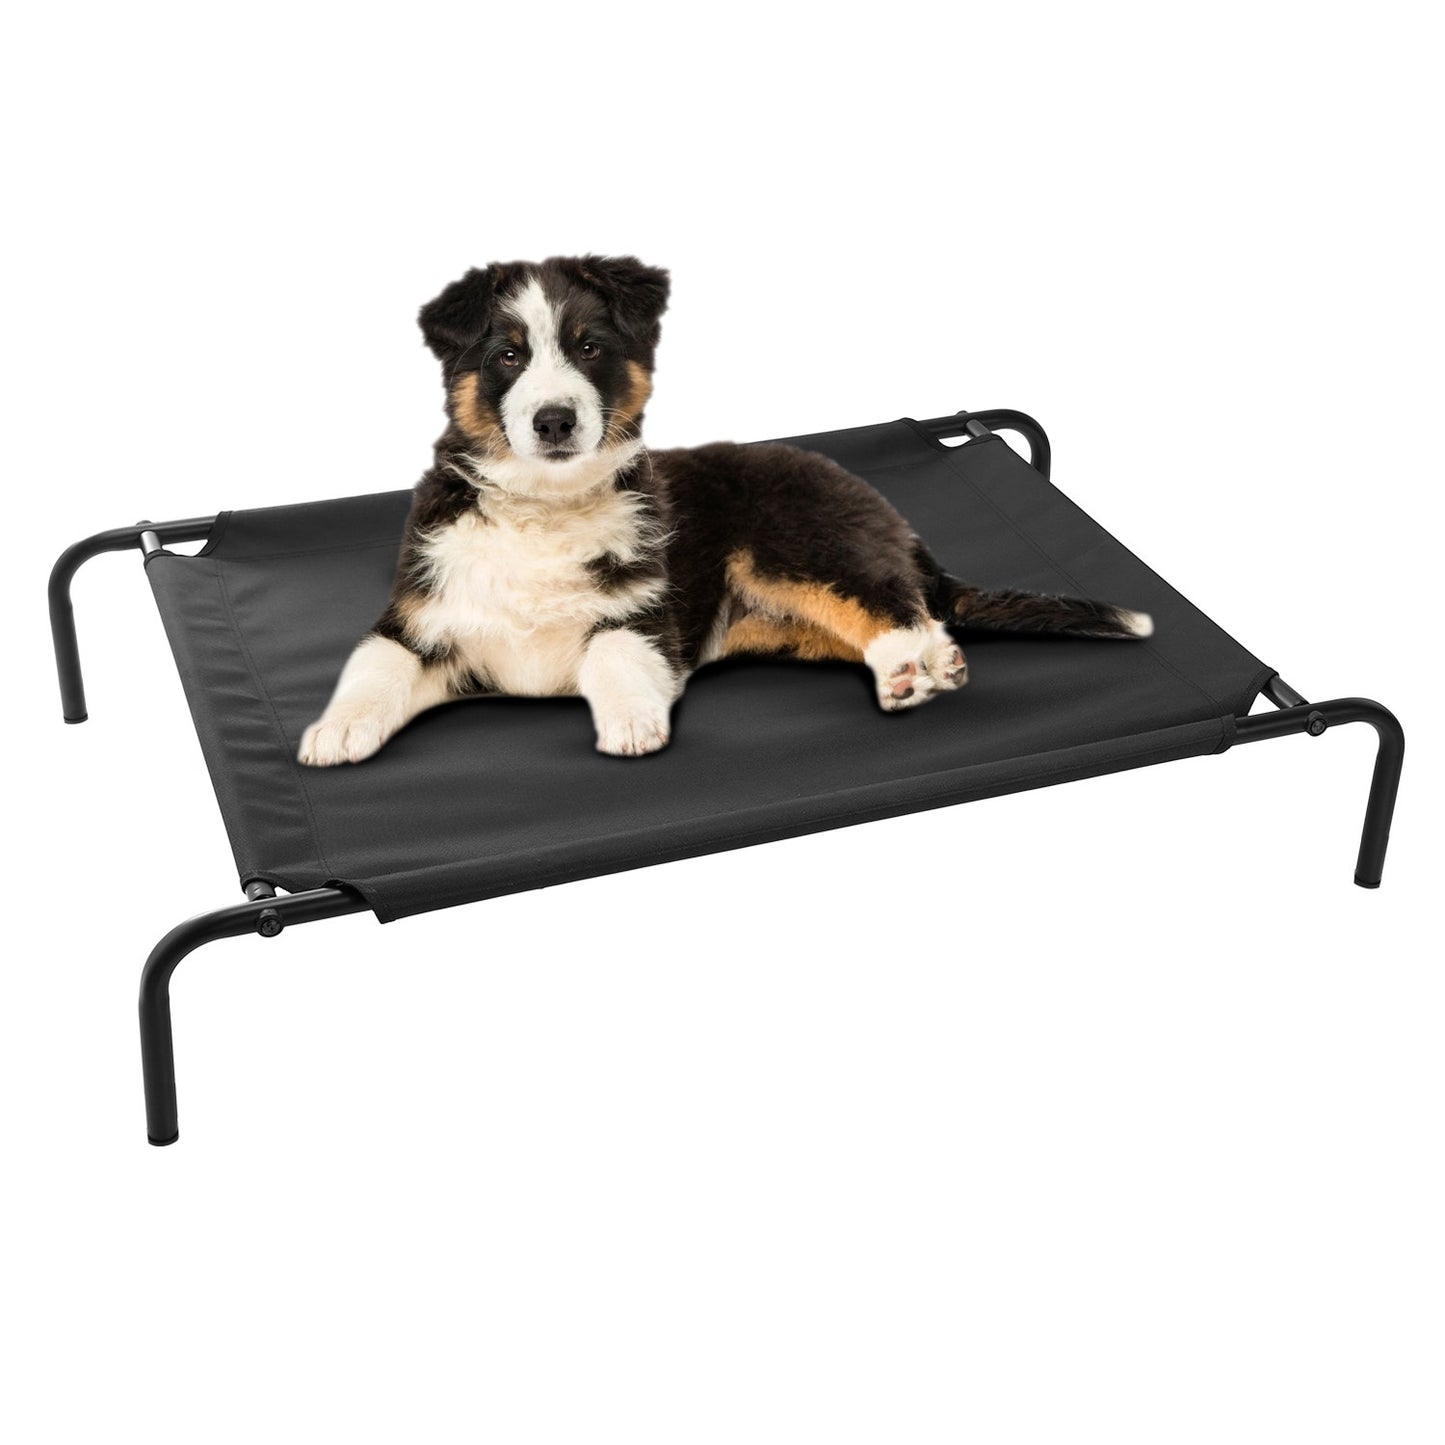 41" Elevated Pet Bed